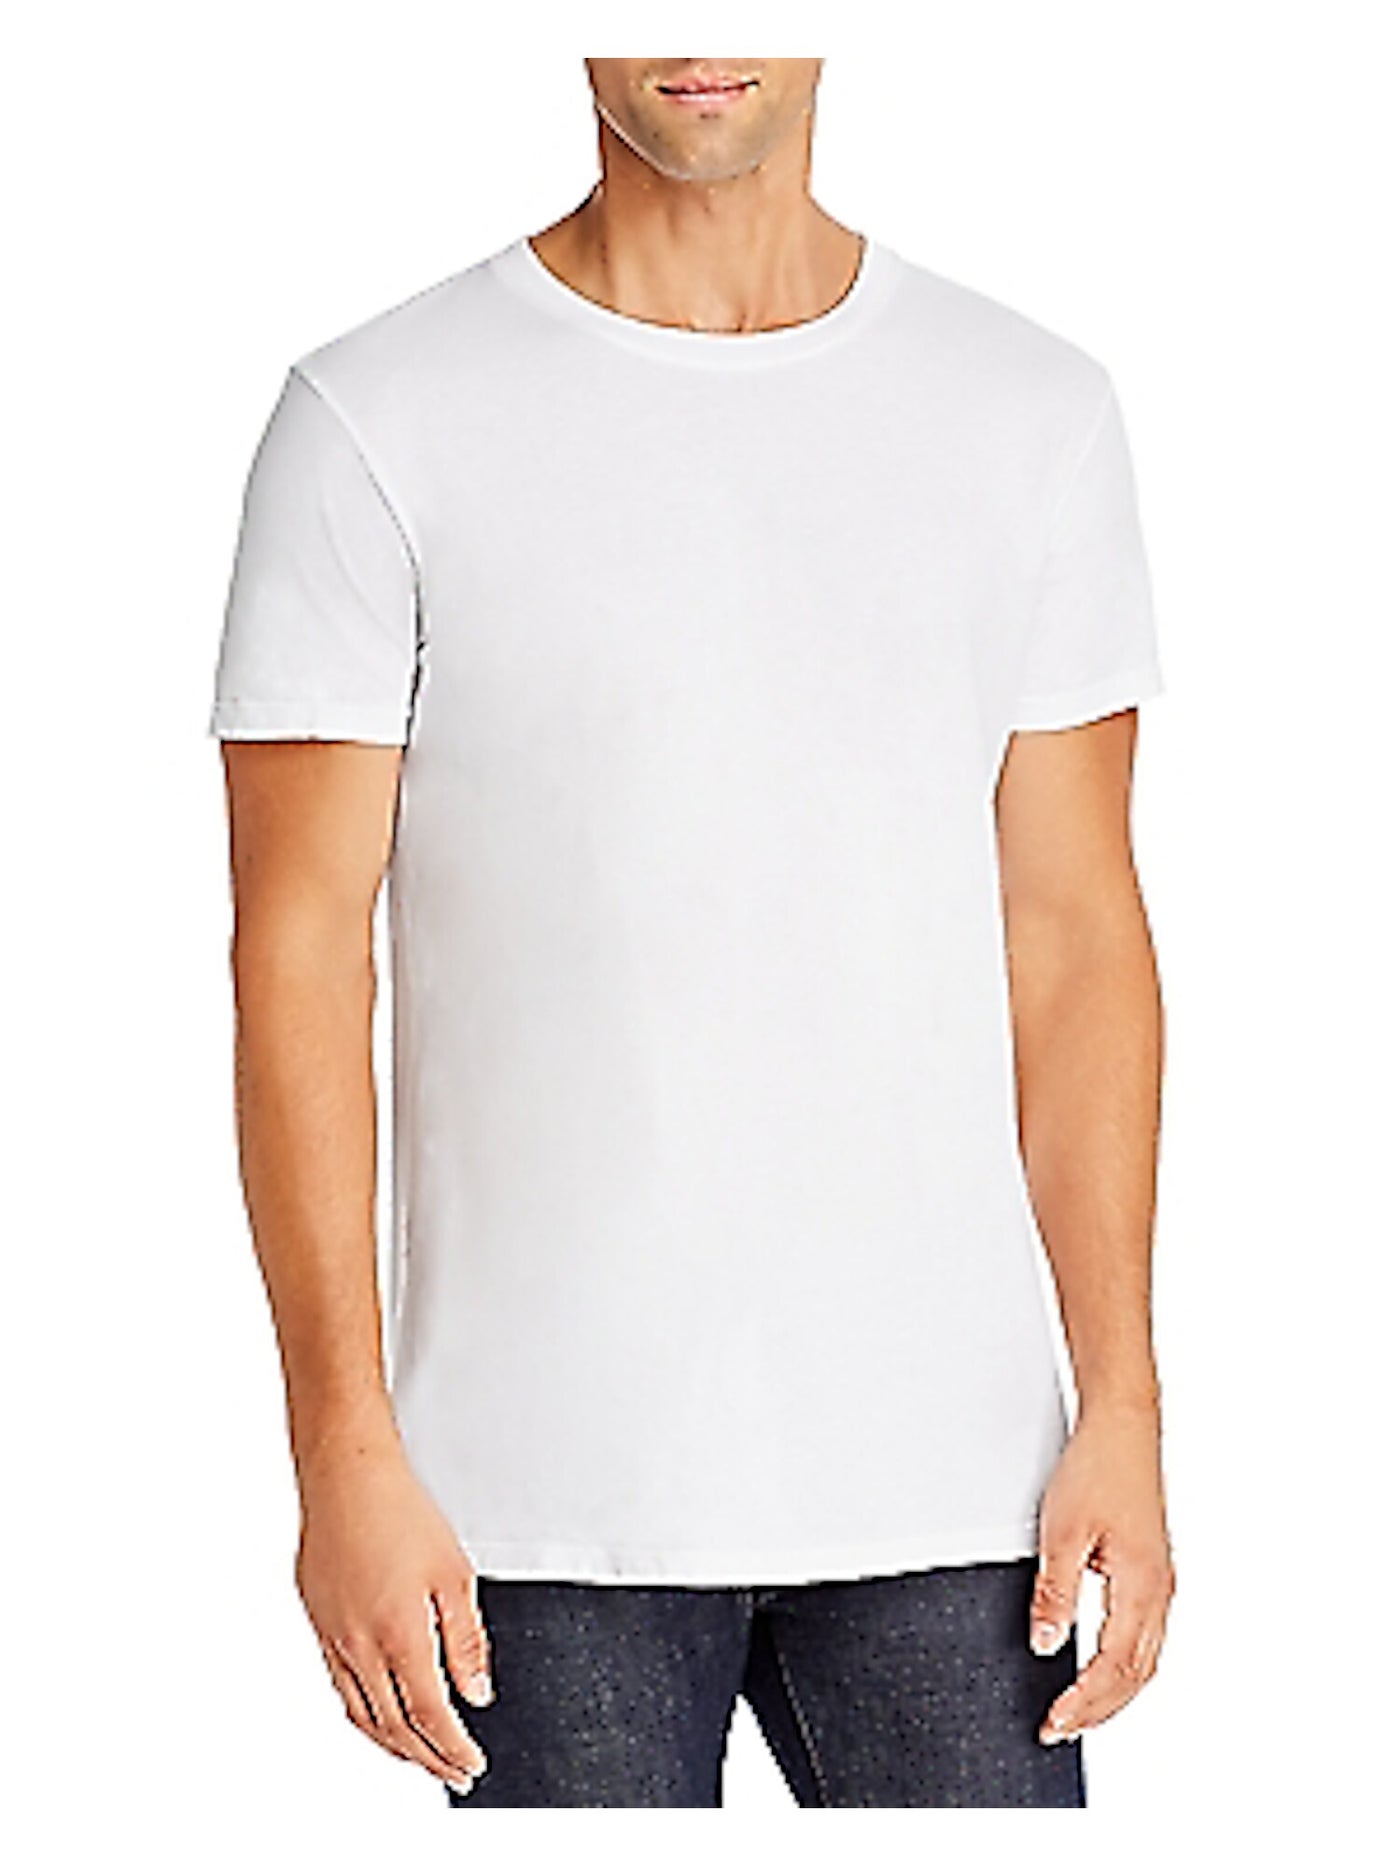 Pacific and Park Mens White Short Sleeve Classic Fit Cotton T-Shirt L